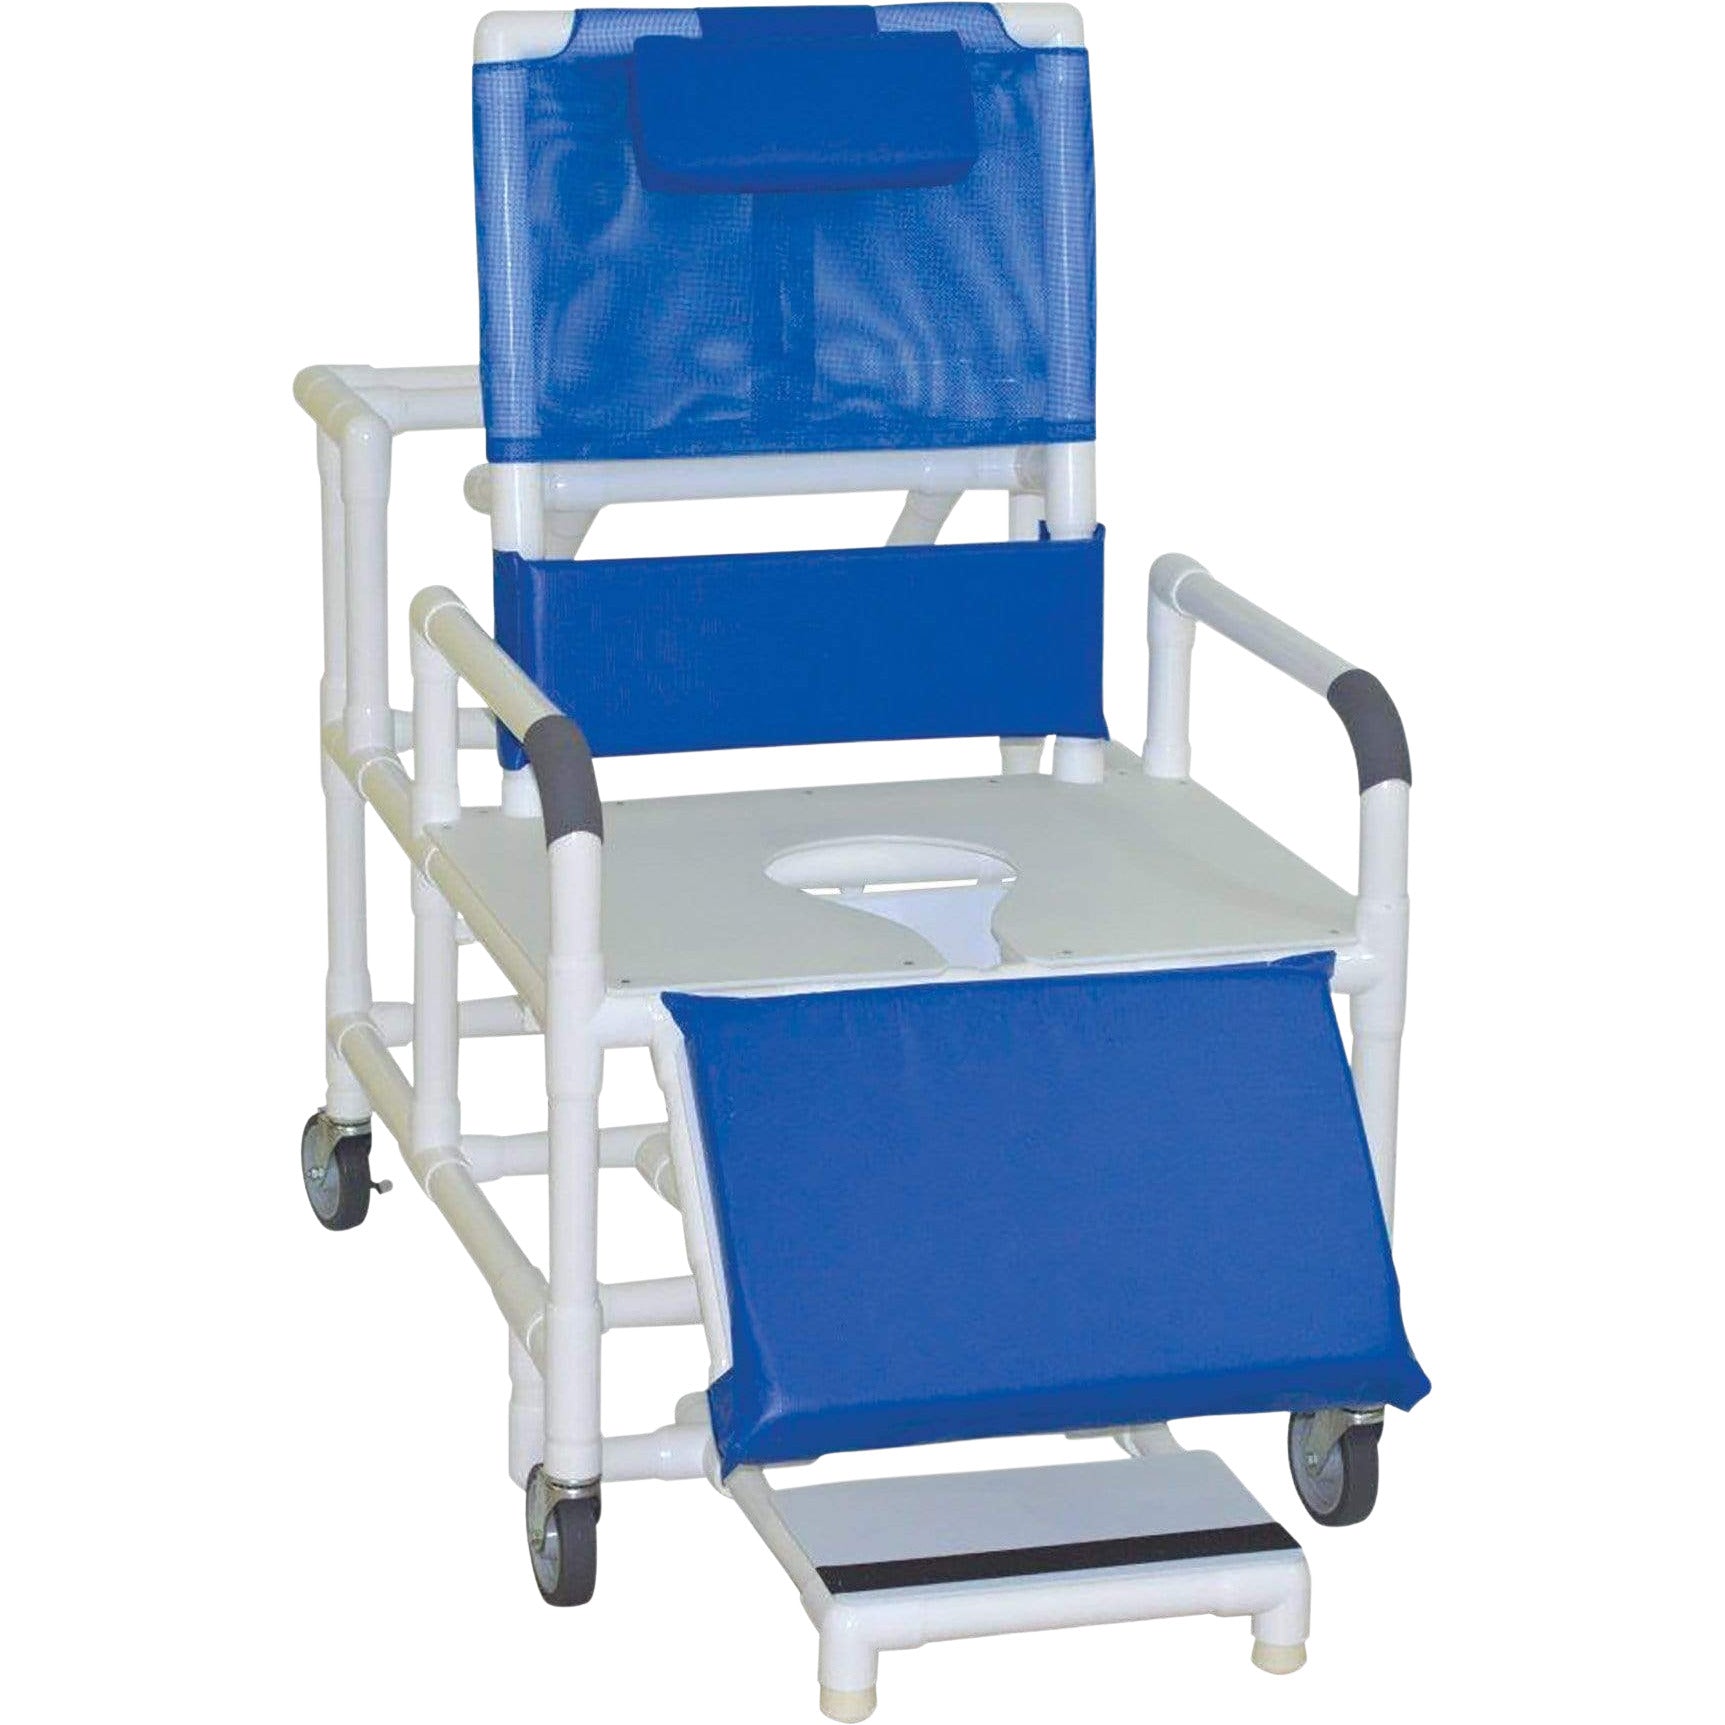 ConvaQuip Shower Chairs Reclining - PVC Bariatric Reclining Chair with Commode Seat Model 196-26-BAR by ConvaQuip